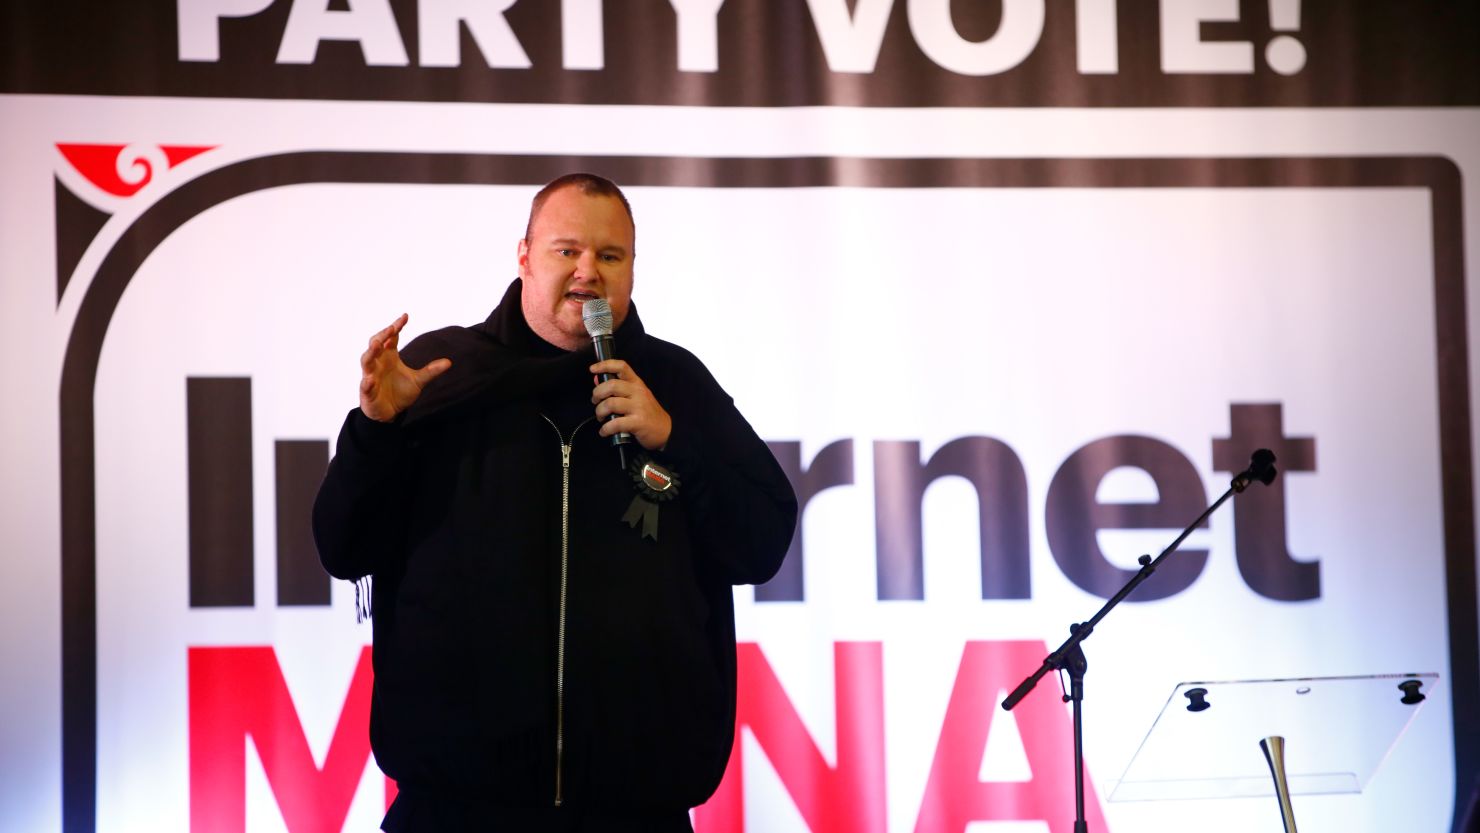 Internet Party founder, Kim Dotcom speaks at the Kelston Community Centre on July 20 in Auckland, New Zealand.